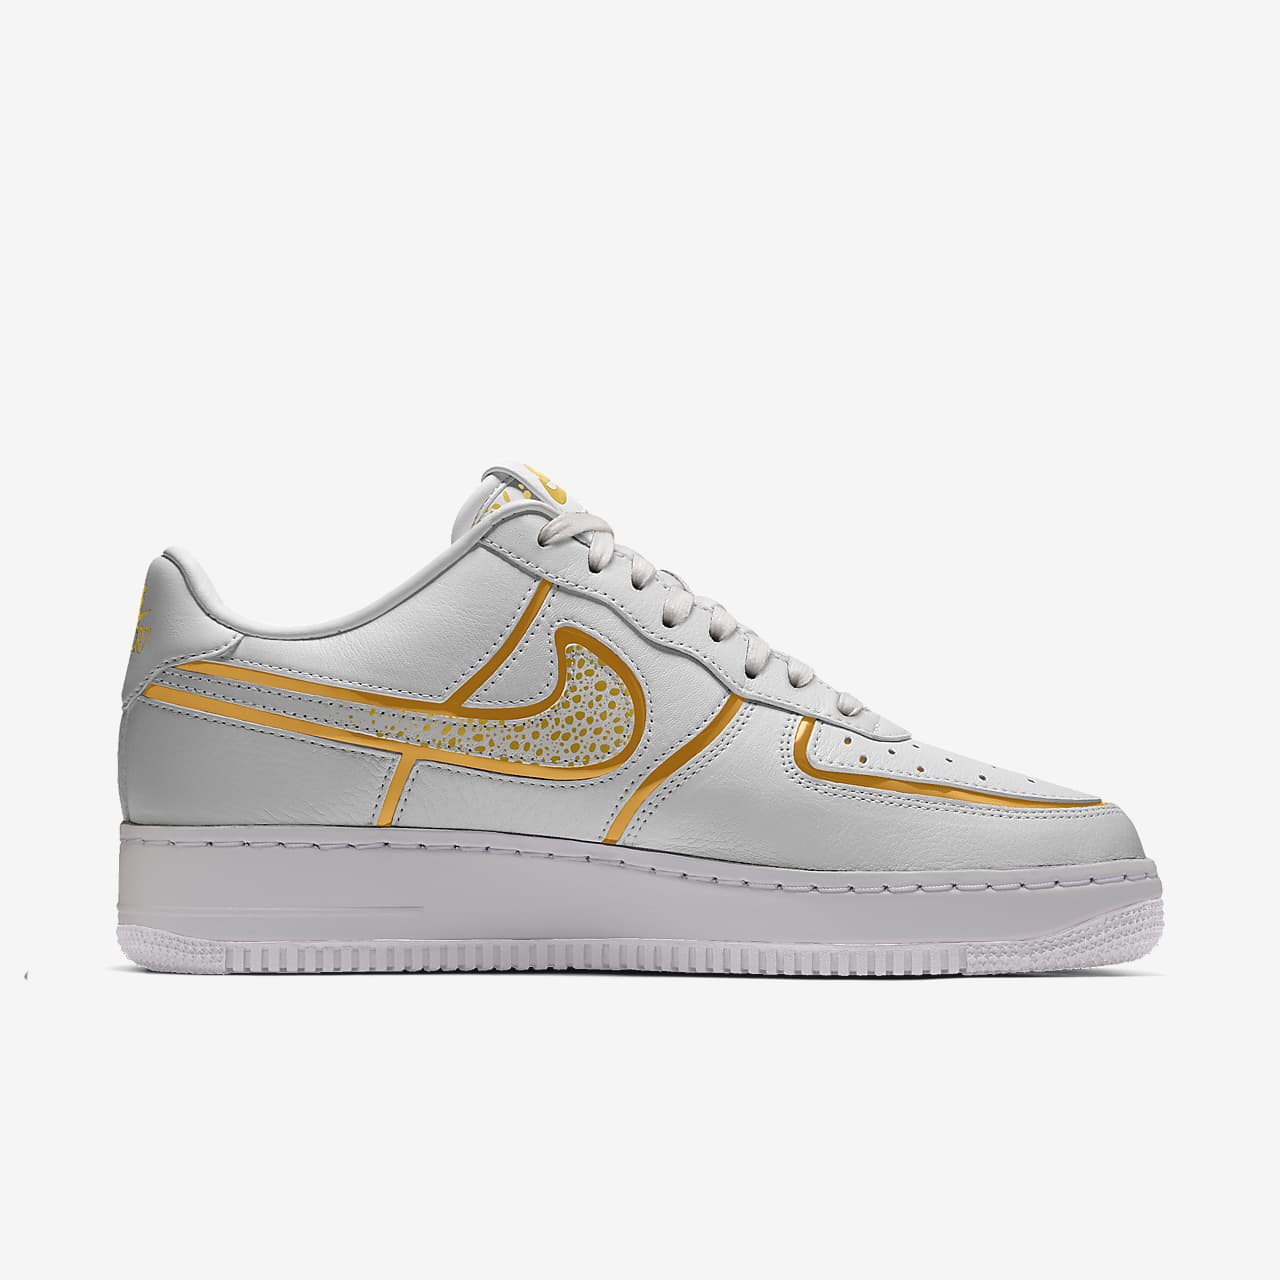 Nike Air Force 1 低筒CR7 By You 專屬訂 